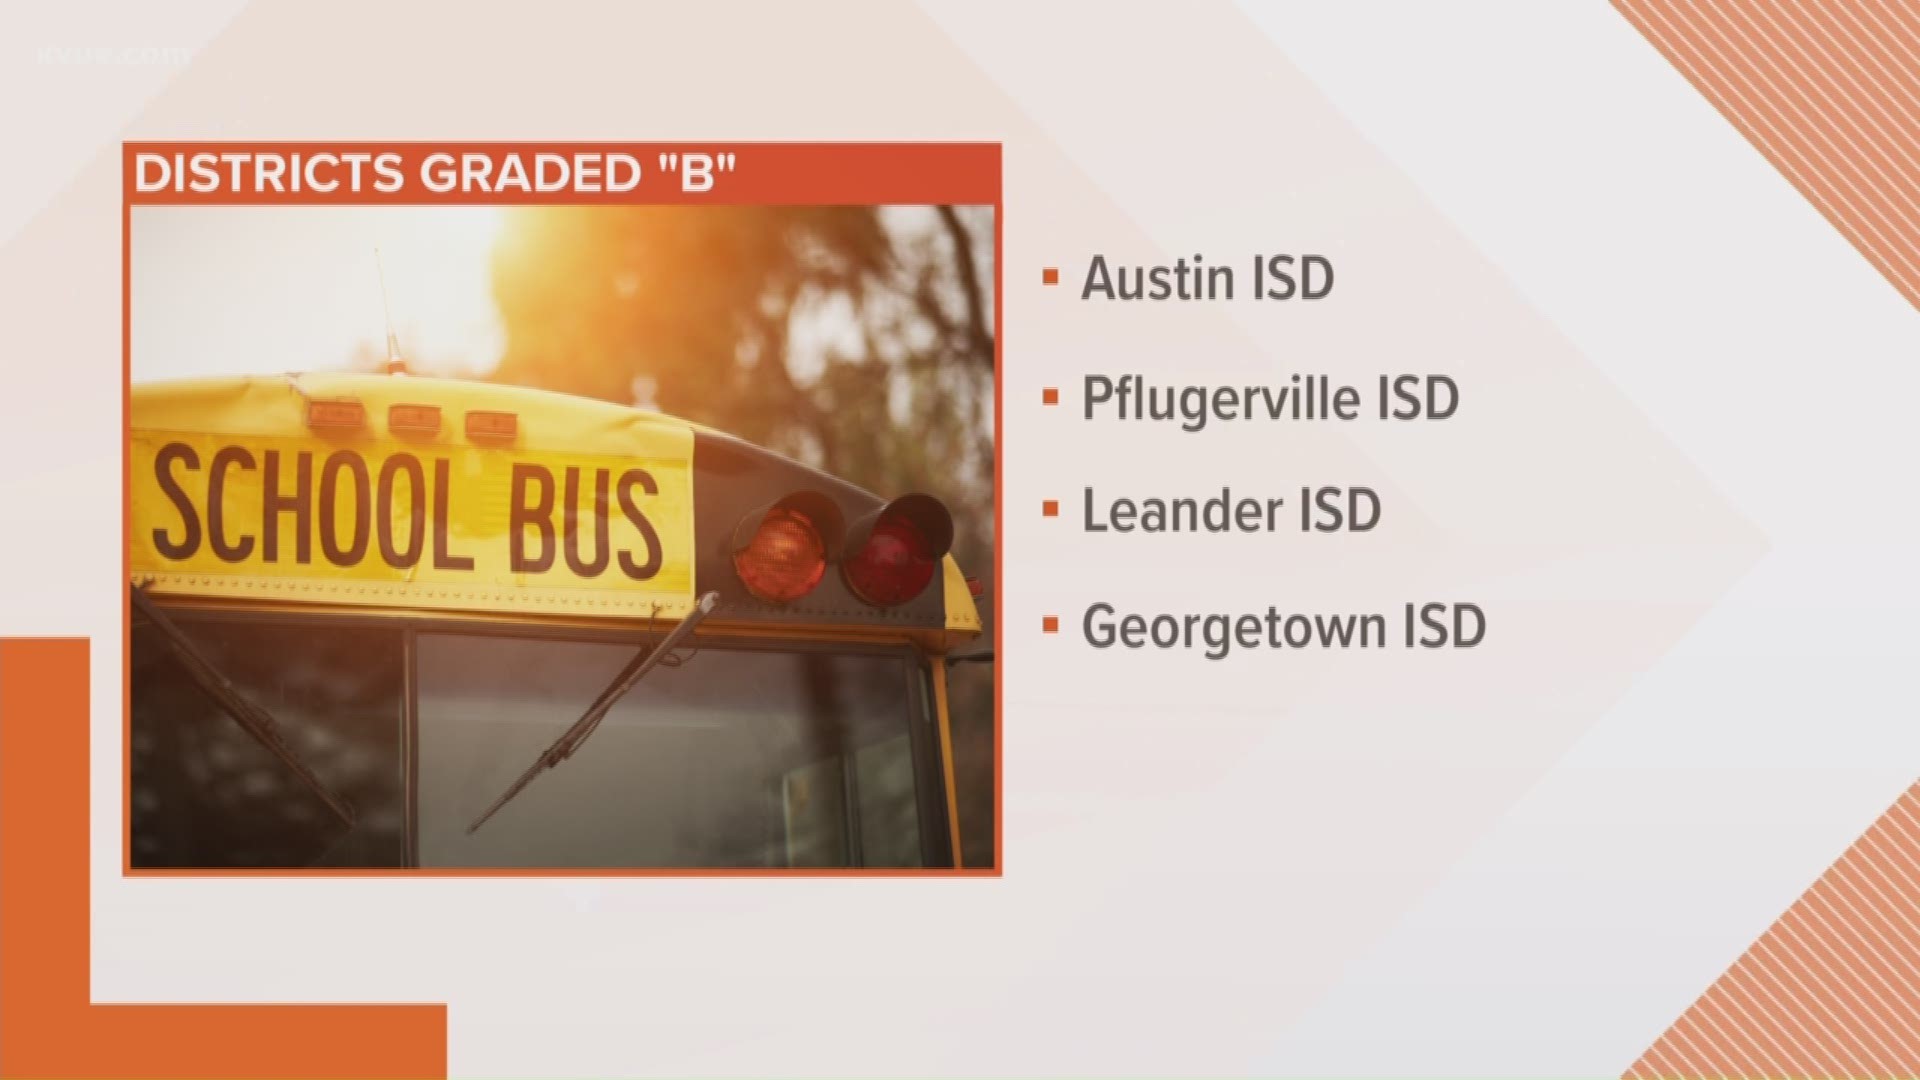 Central Texas school districts receive new grades